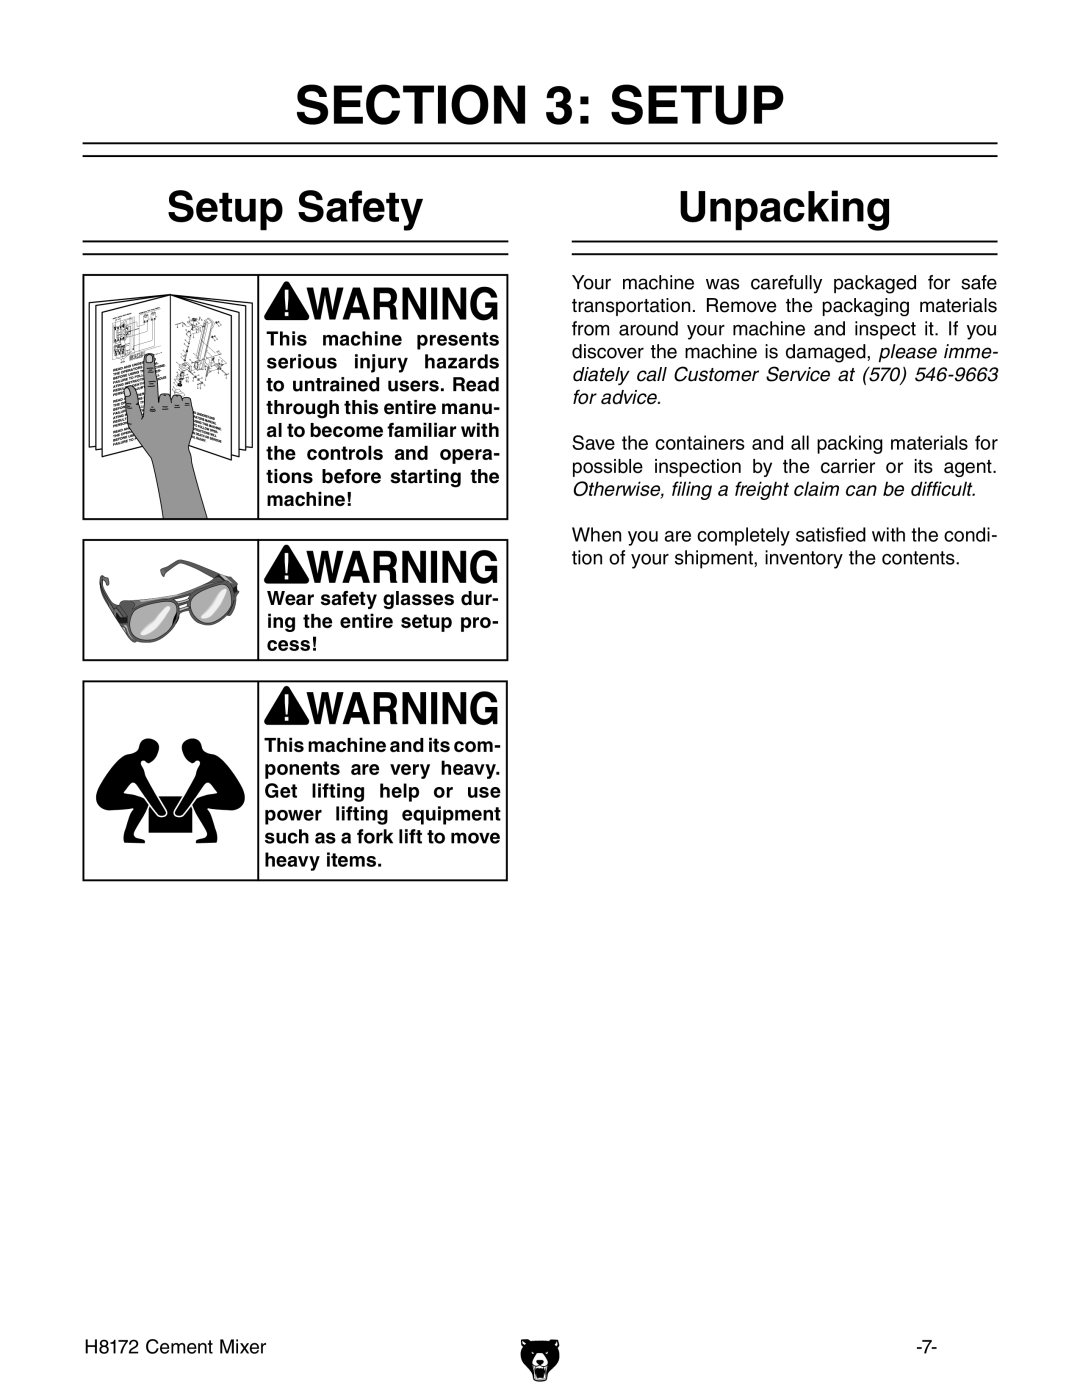 Grizzly H8172 owner manual Setup Safety, Unpacking 